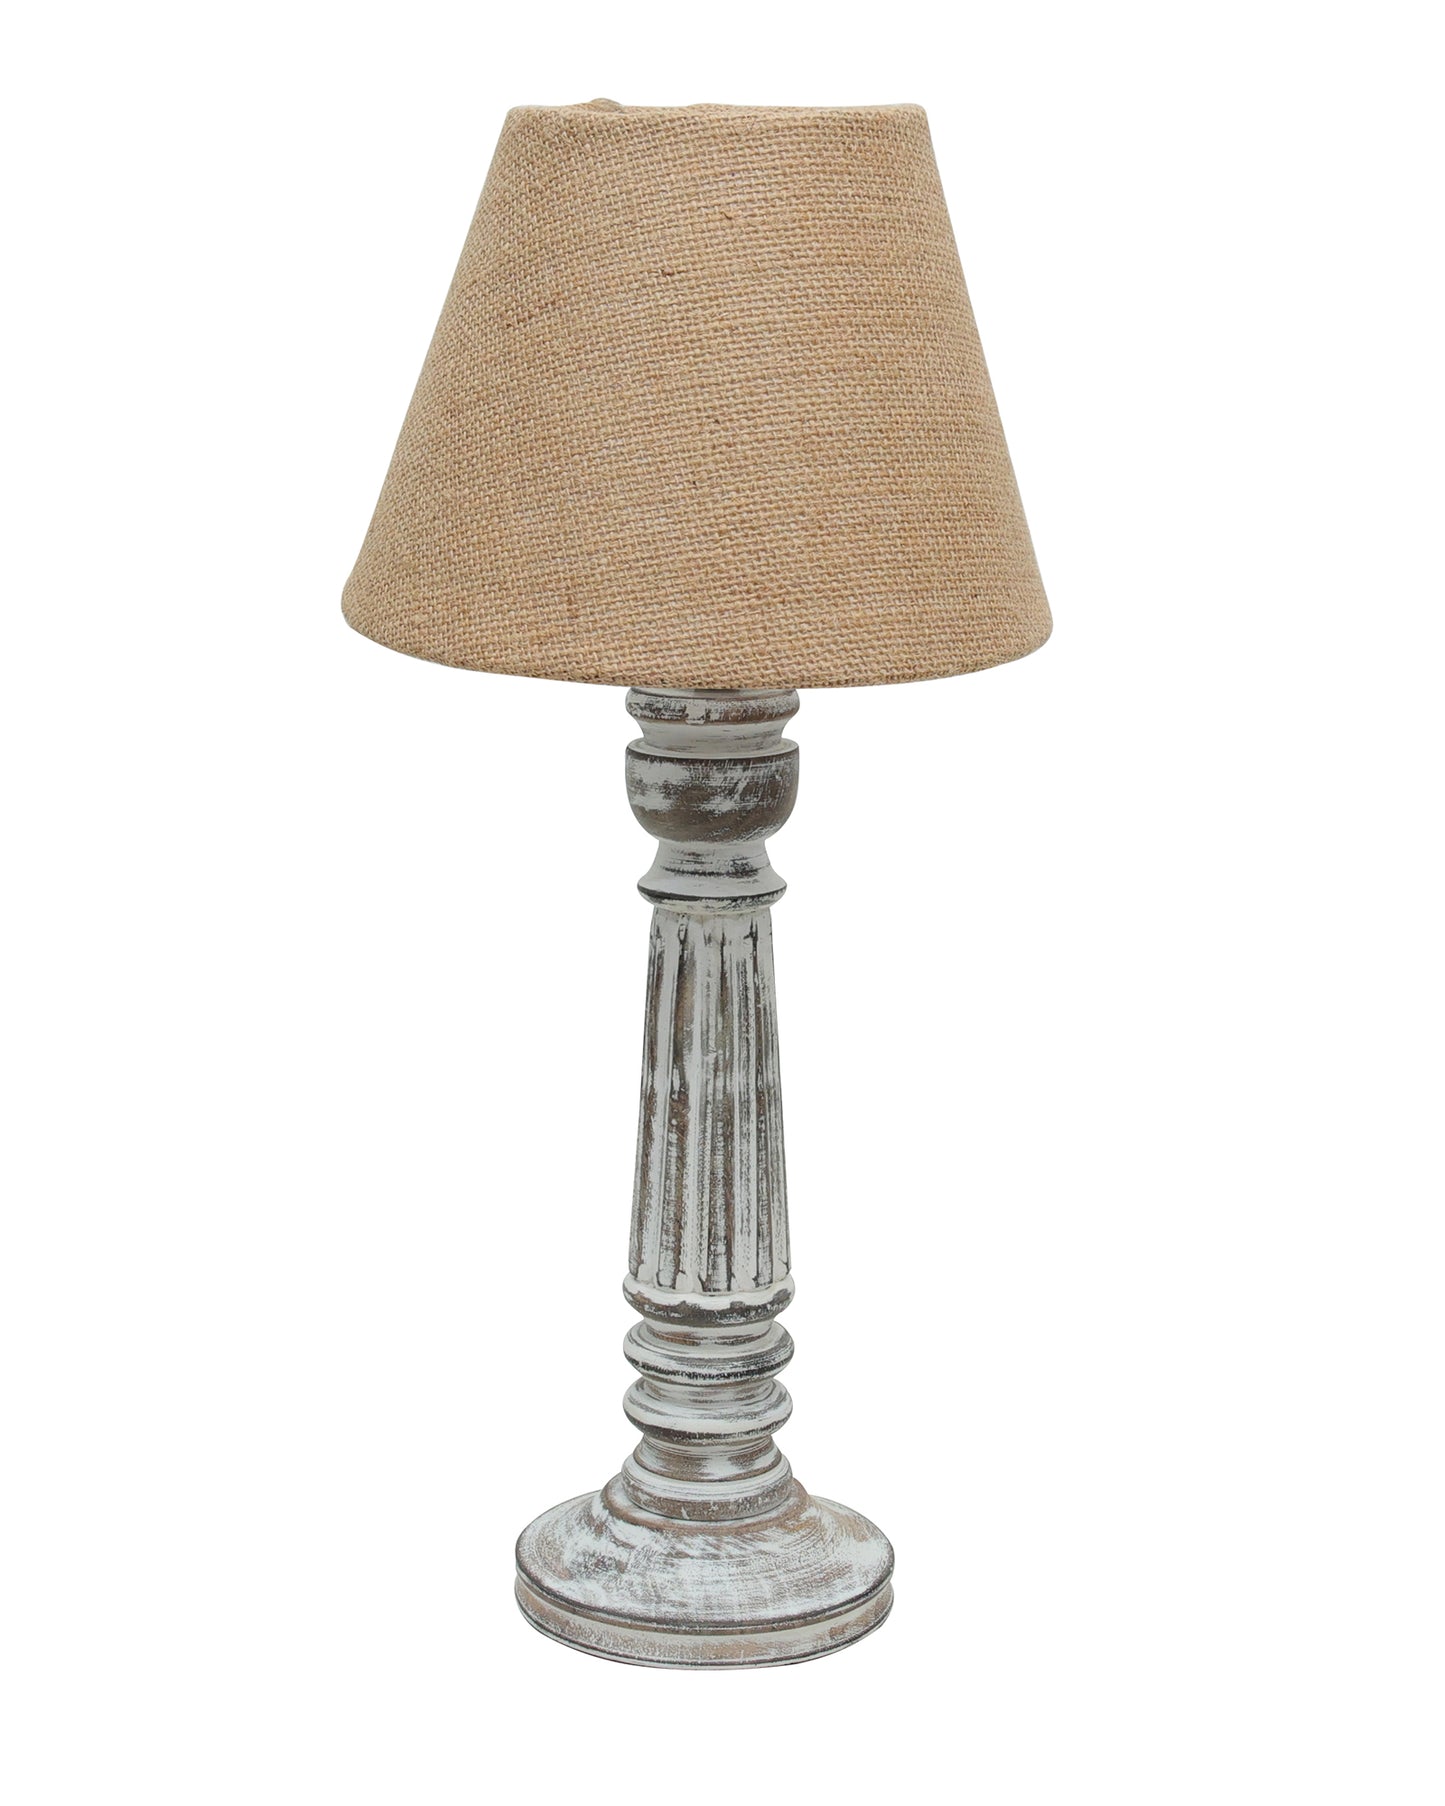 Traditional Country Cottage Table Lamp Antique White Athens Desk Lamp for Bedroom Living Room